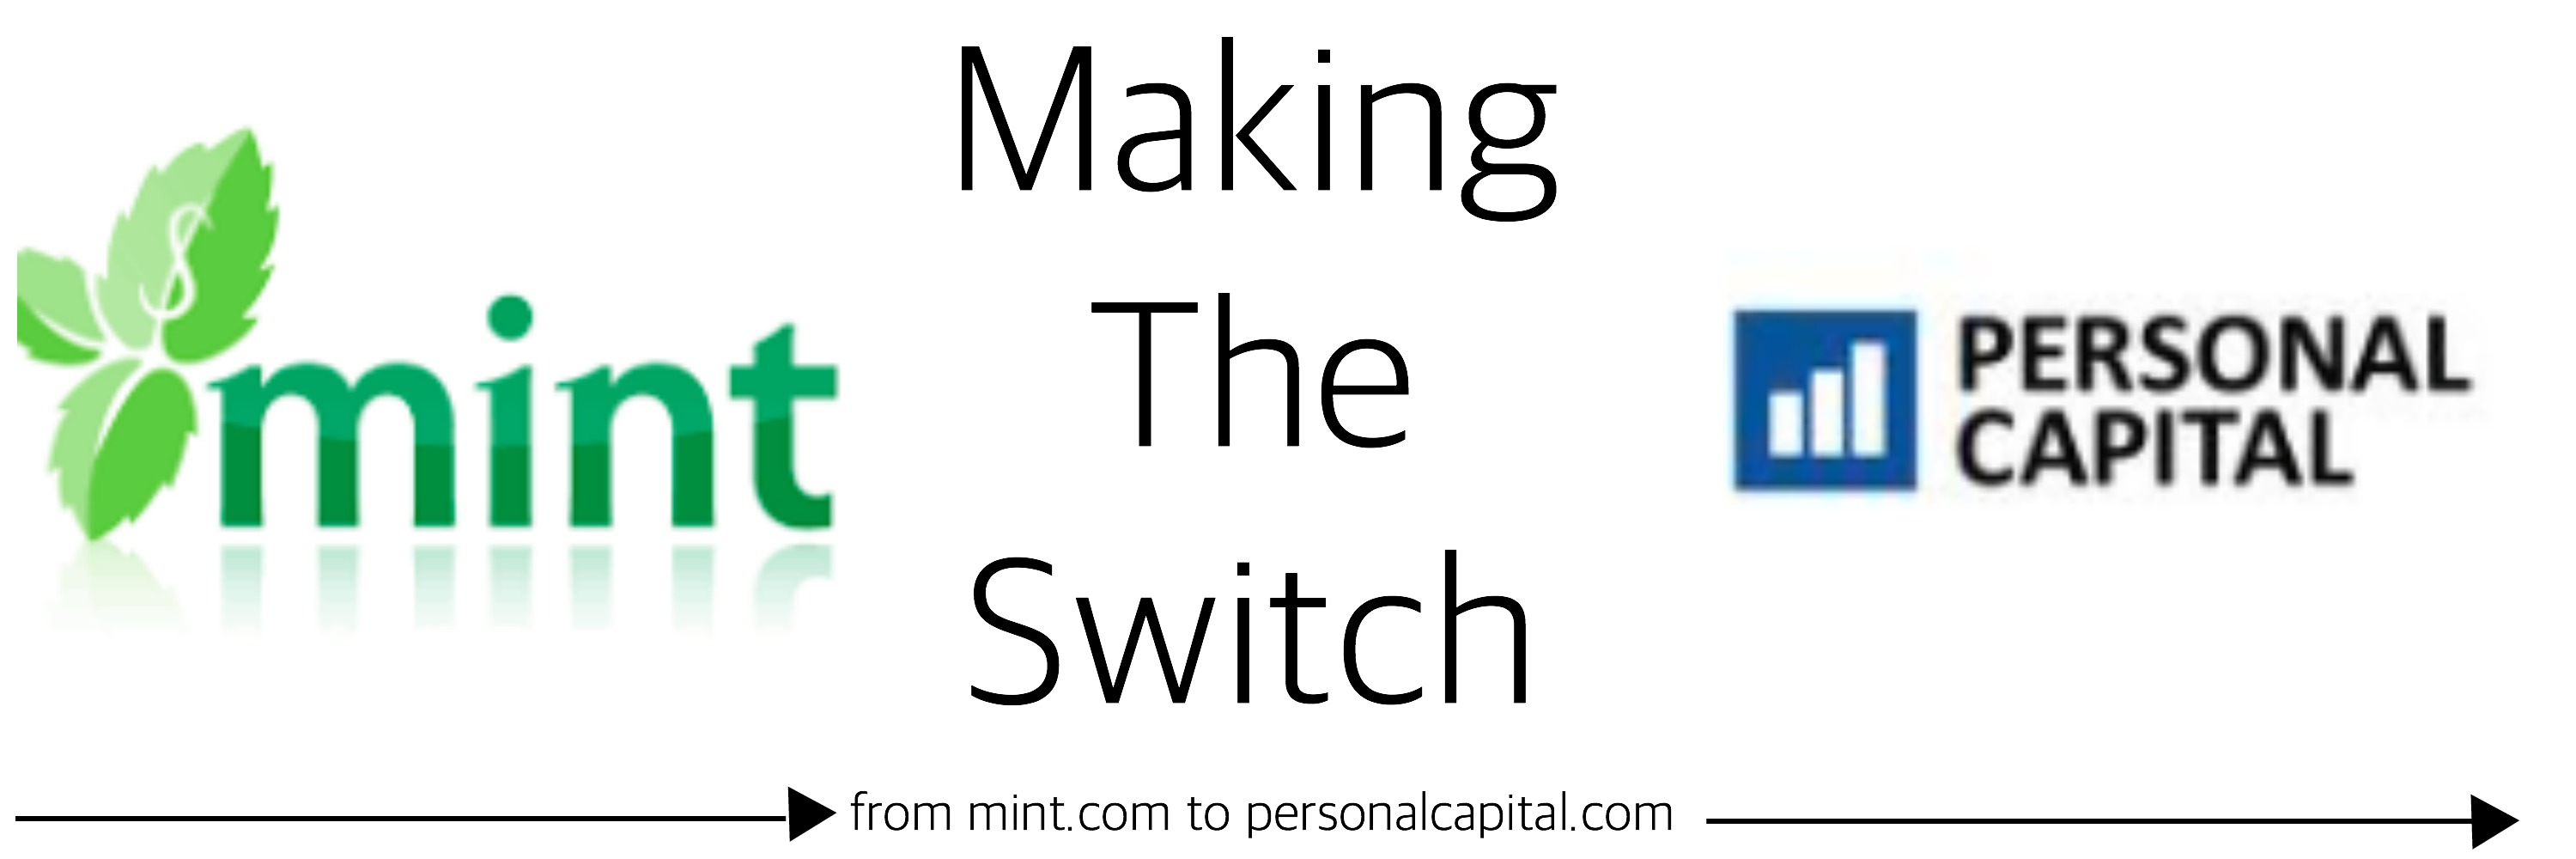 Making the Switch from Mint to PersonalCapital